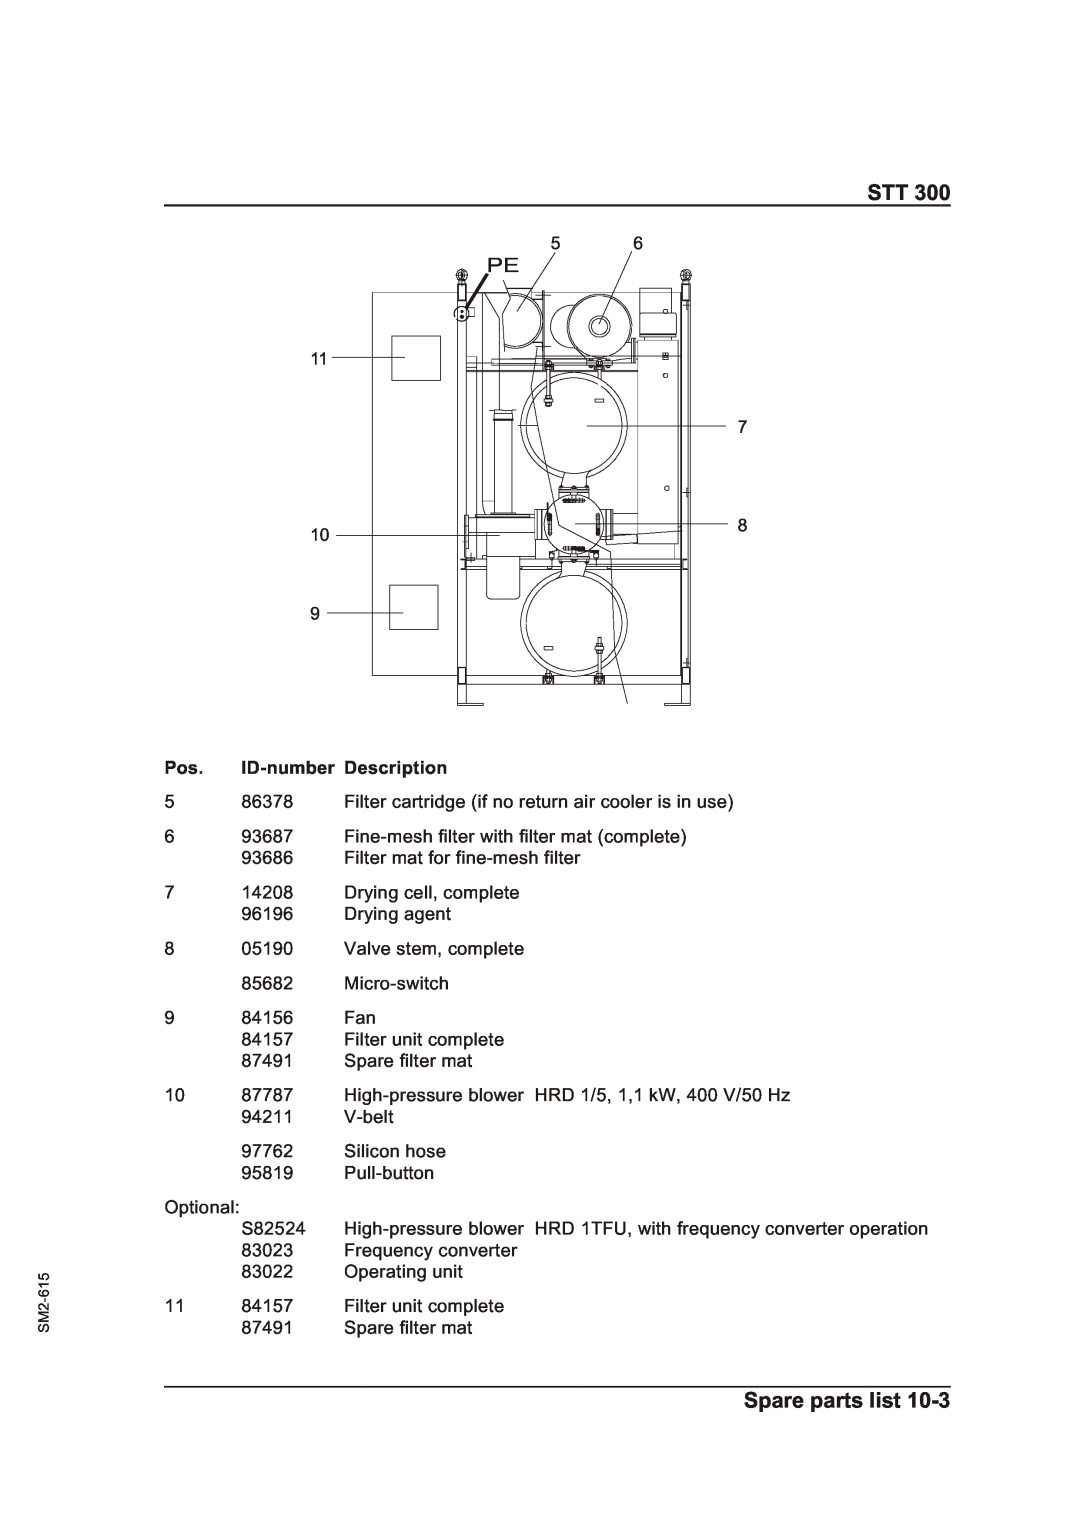 Sterling STT 300 operating instructions Spare parts list, Pos. ID-numberDescription 